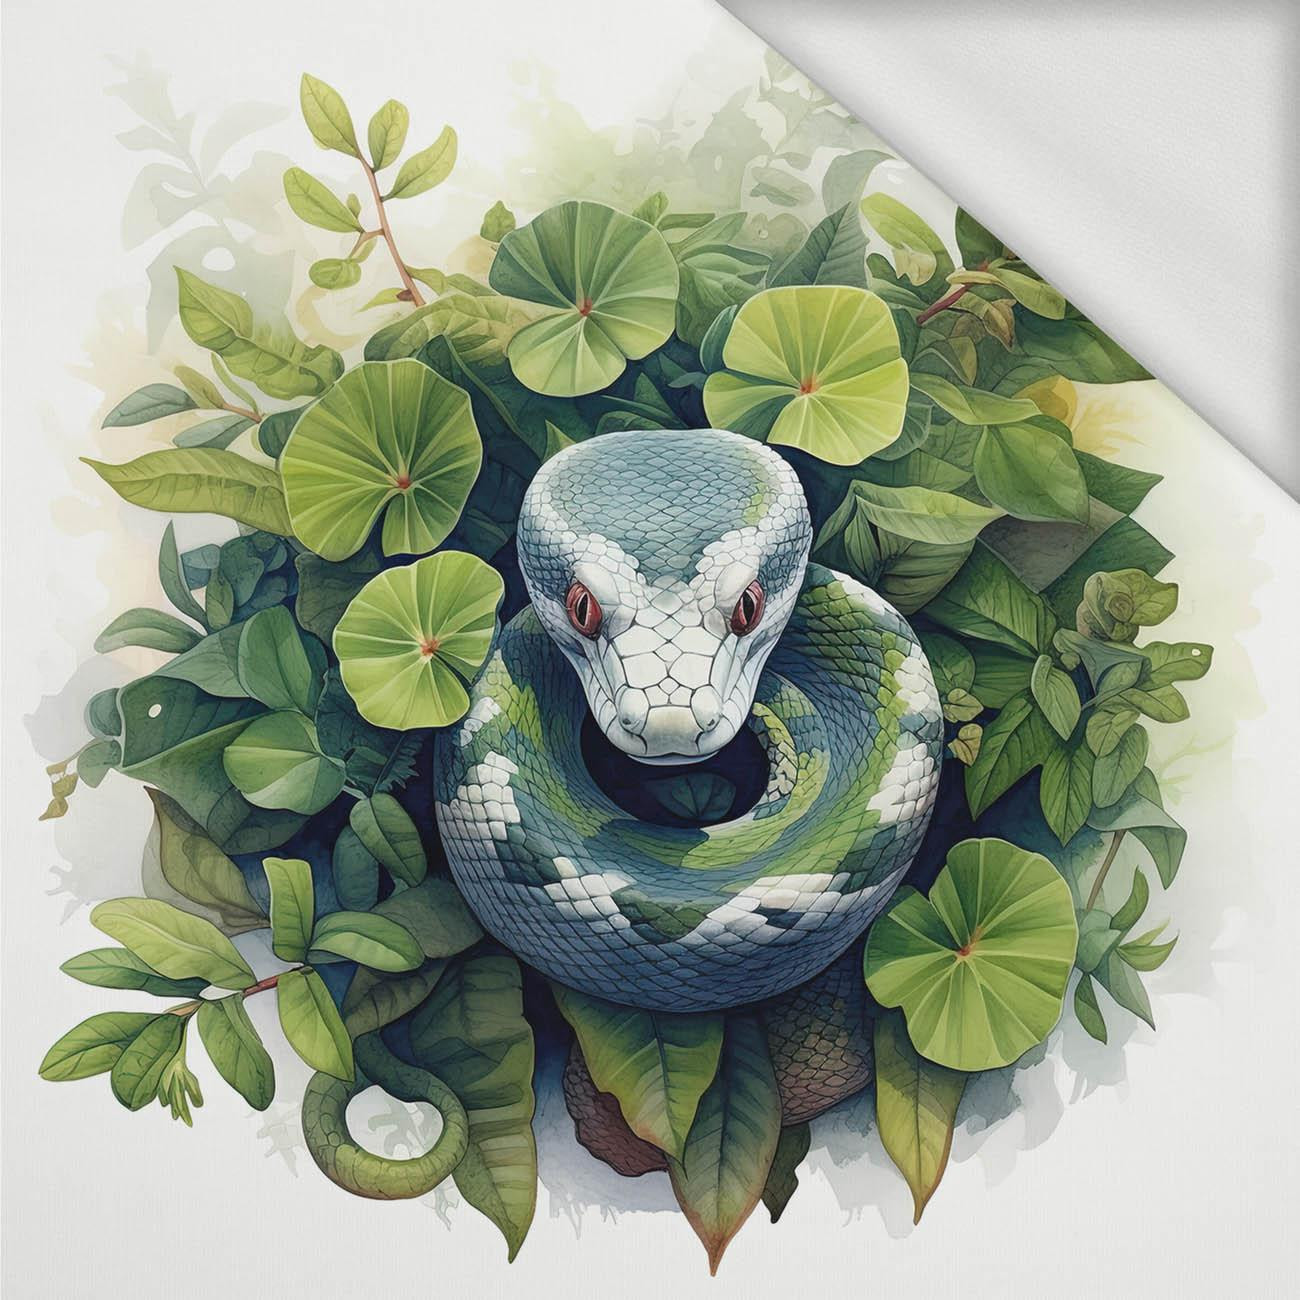 WATERCOLOR SNAKE - Panel (75cm x 80cm) Sommersweat